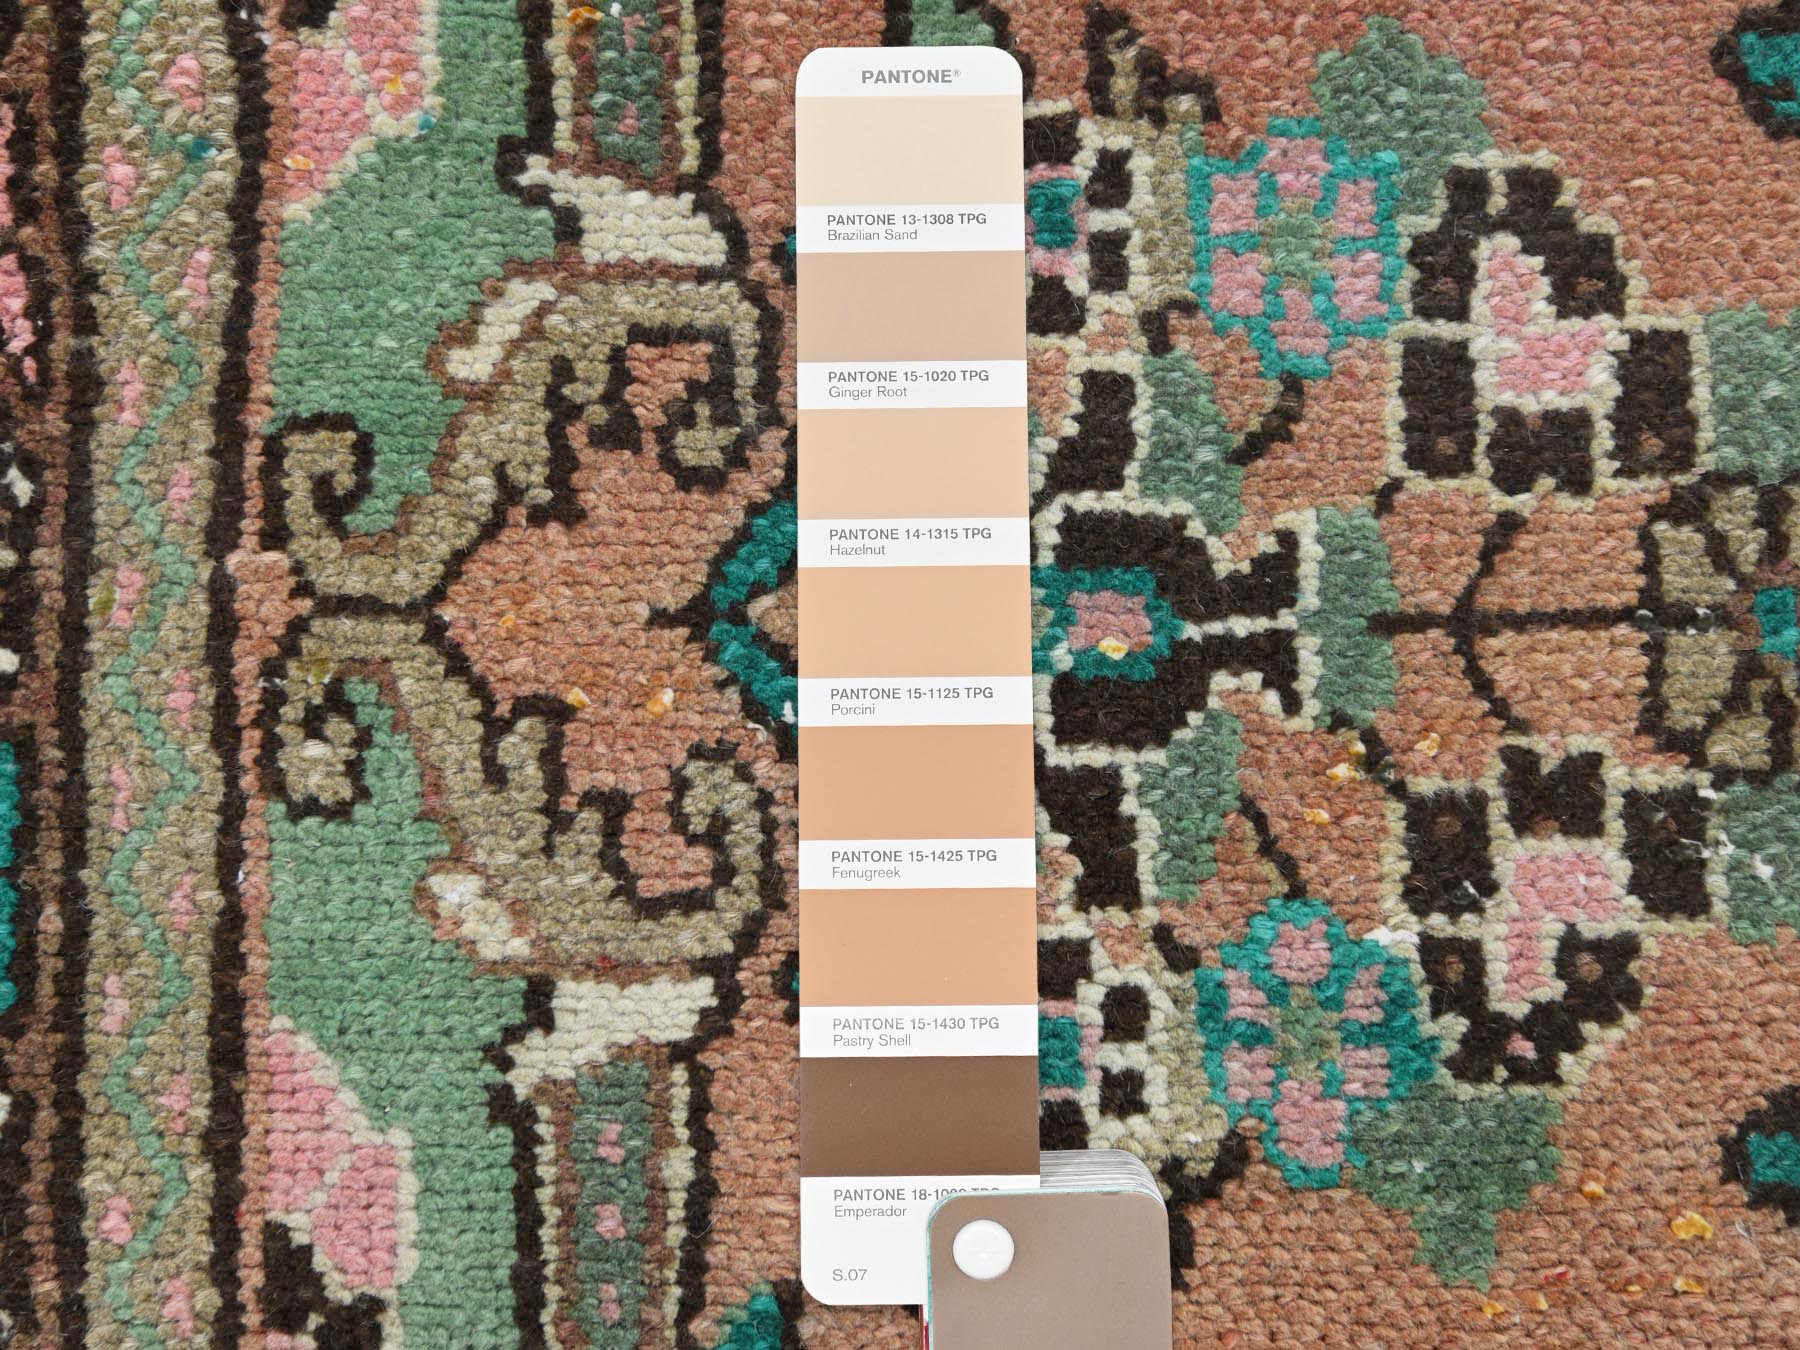 Overdyed & Vintage Rugs LUV730836